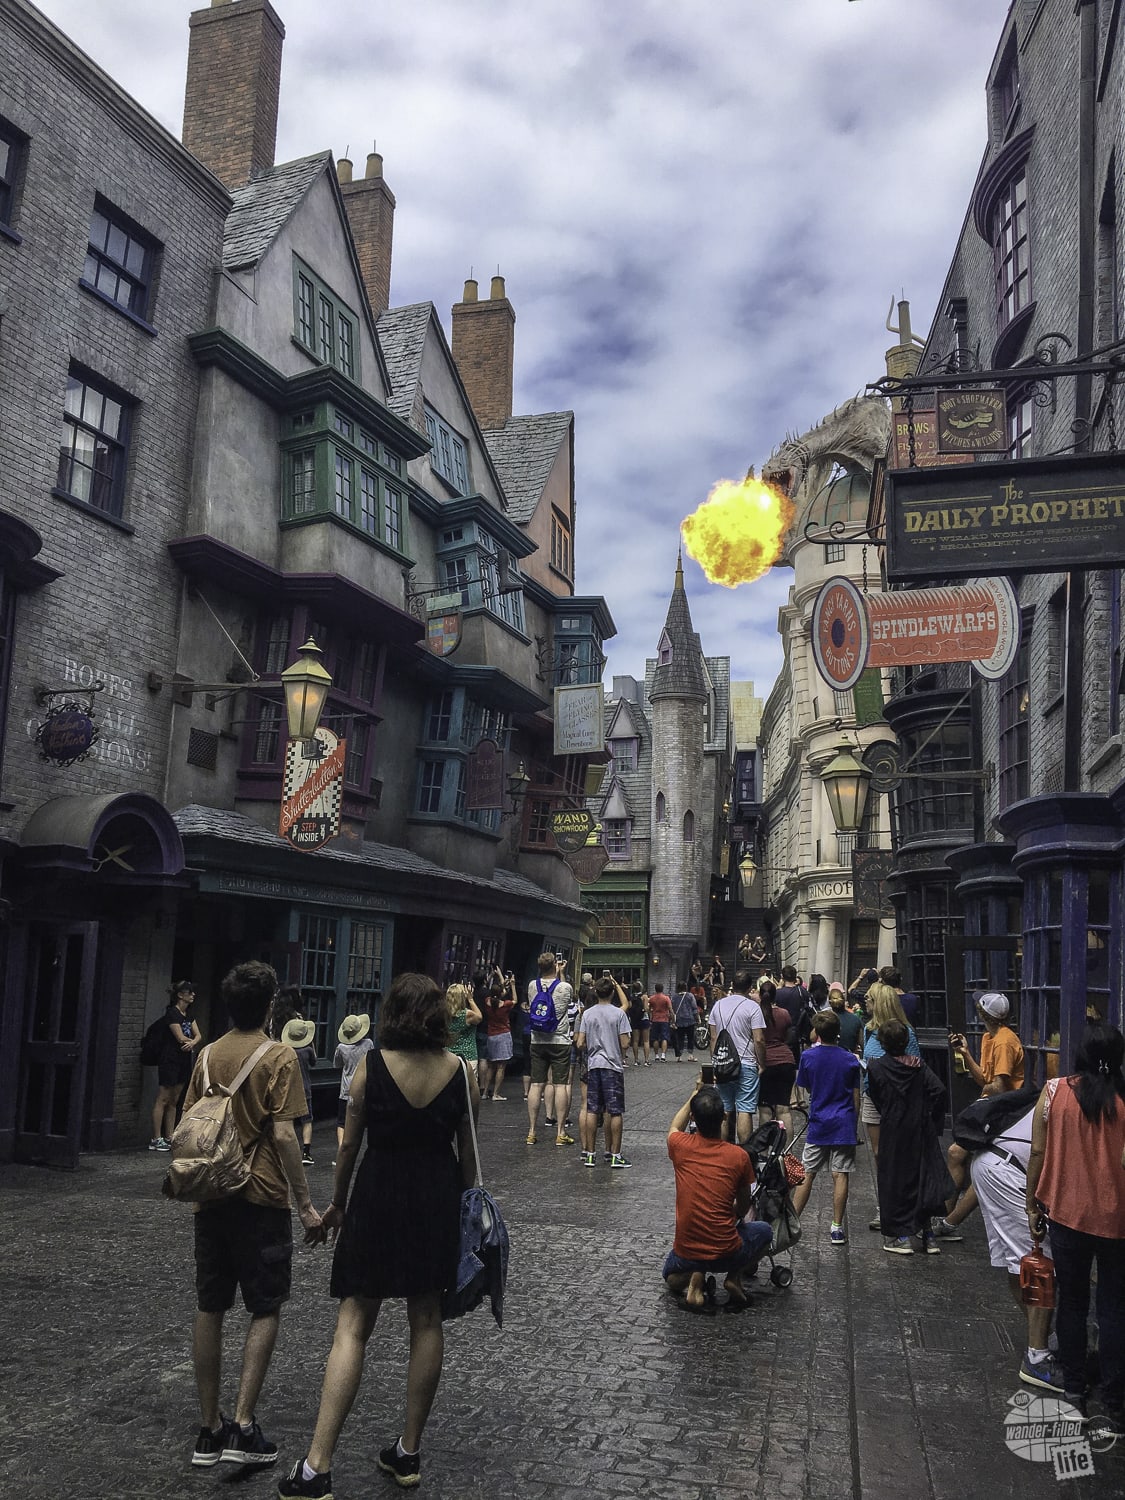 The dragon will breathe fire from time to time in Diagon Alley.